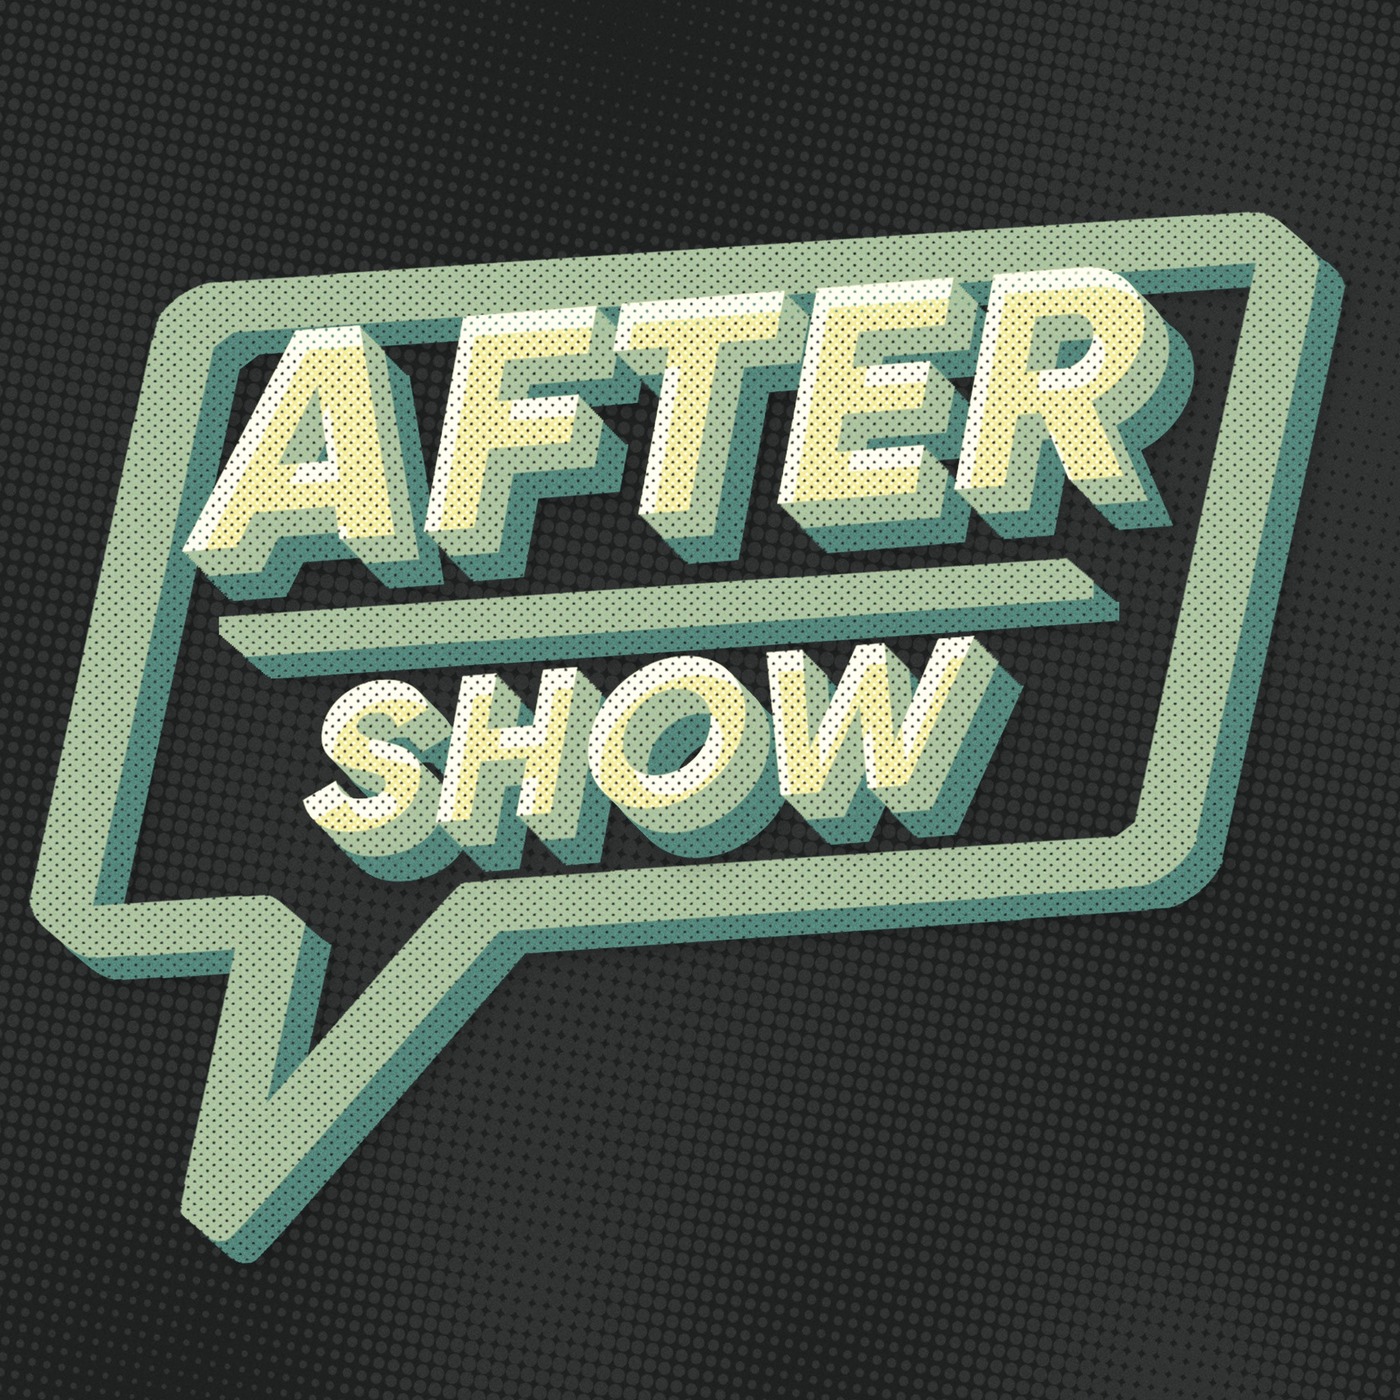 The Last Of Us Episode 8 Aftershow